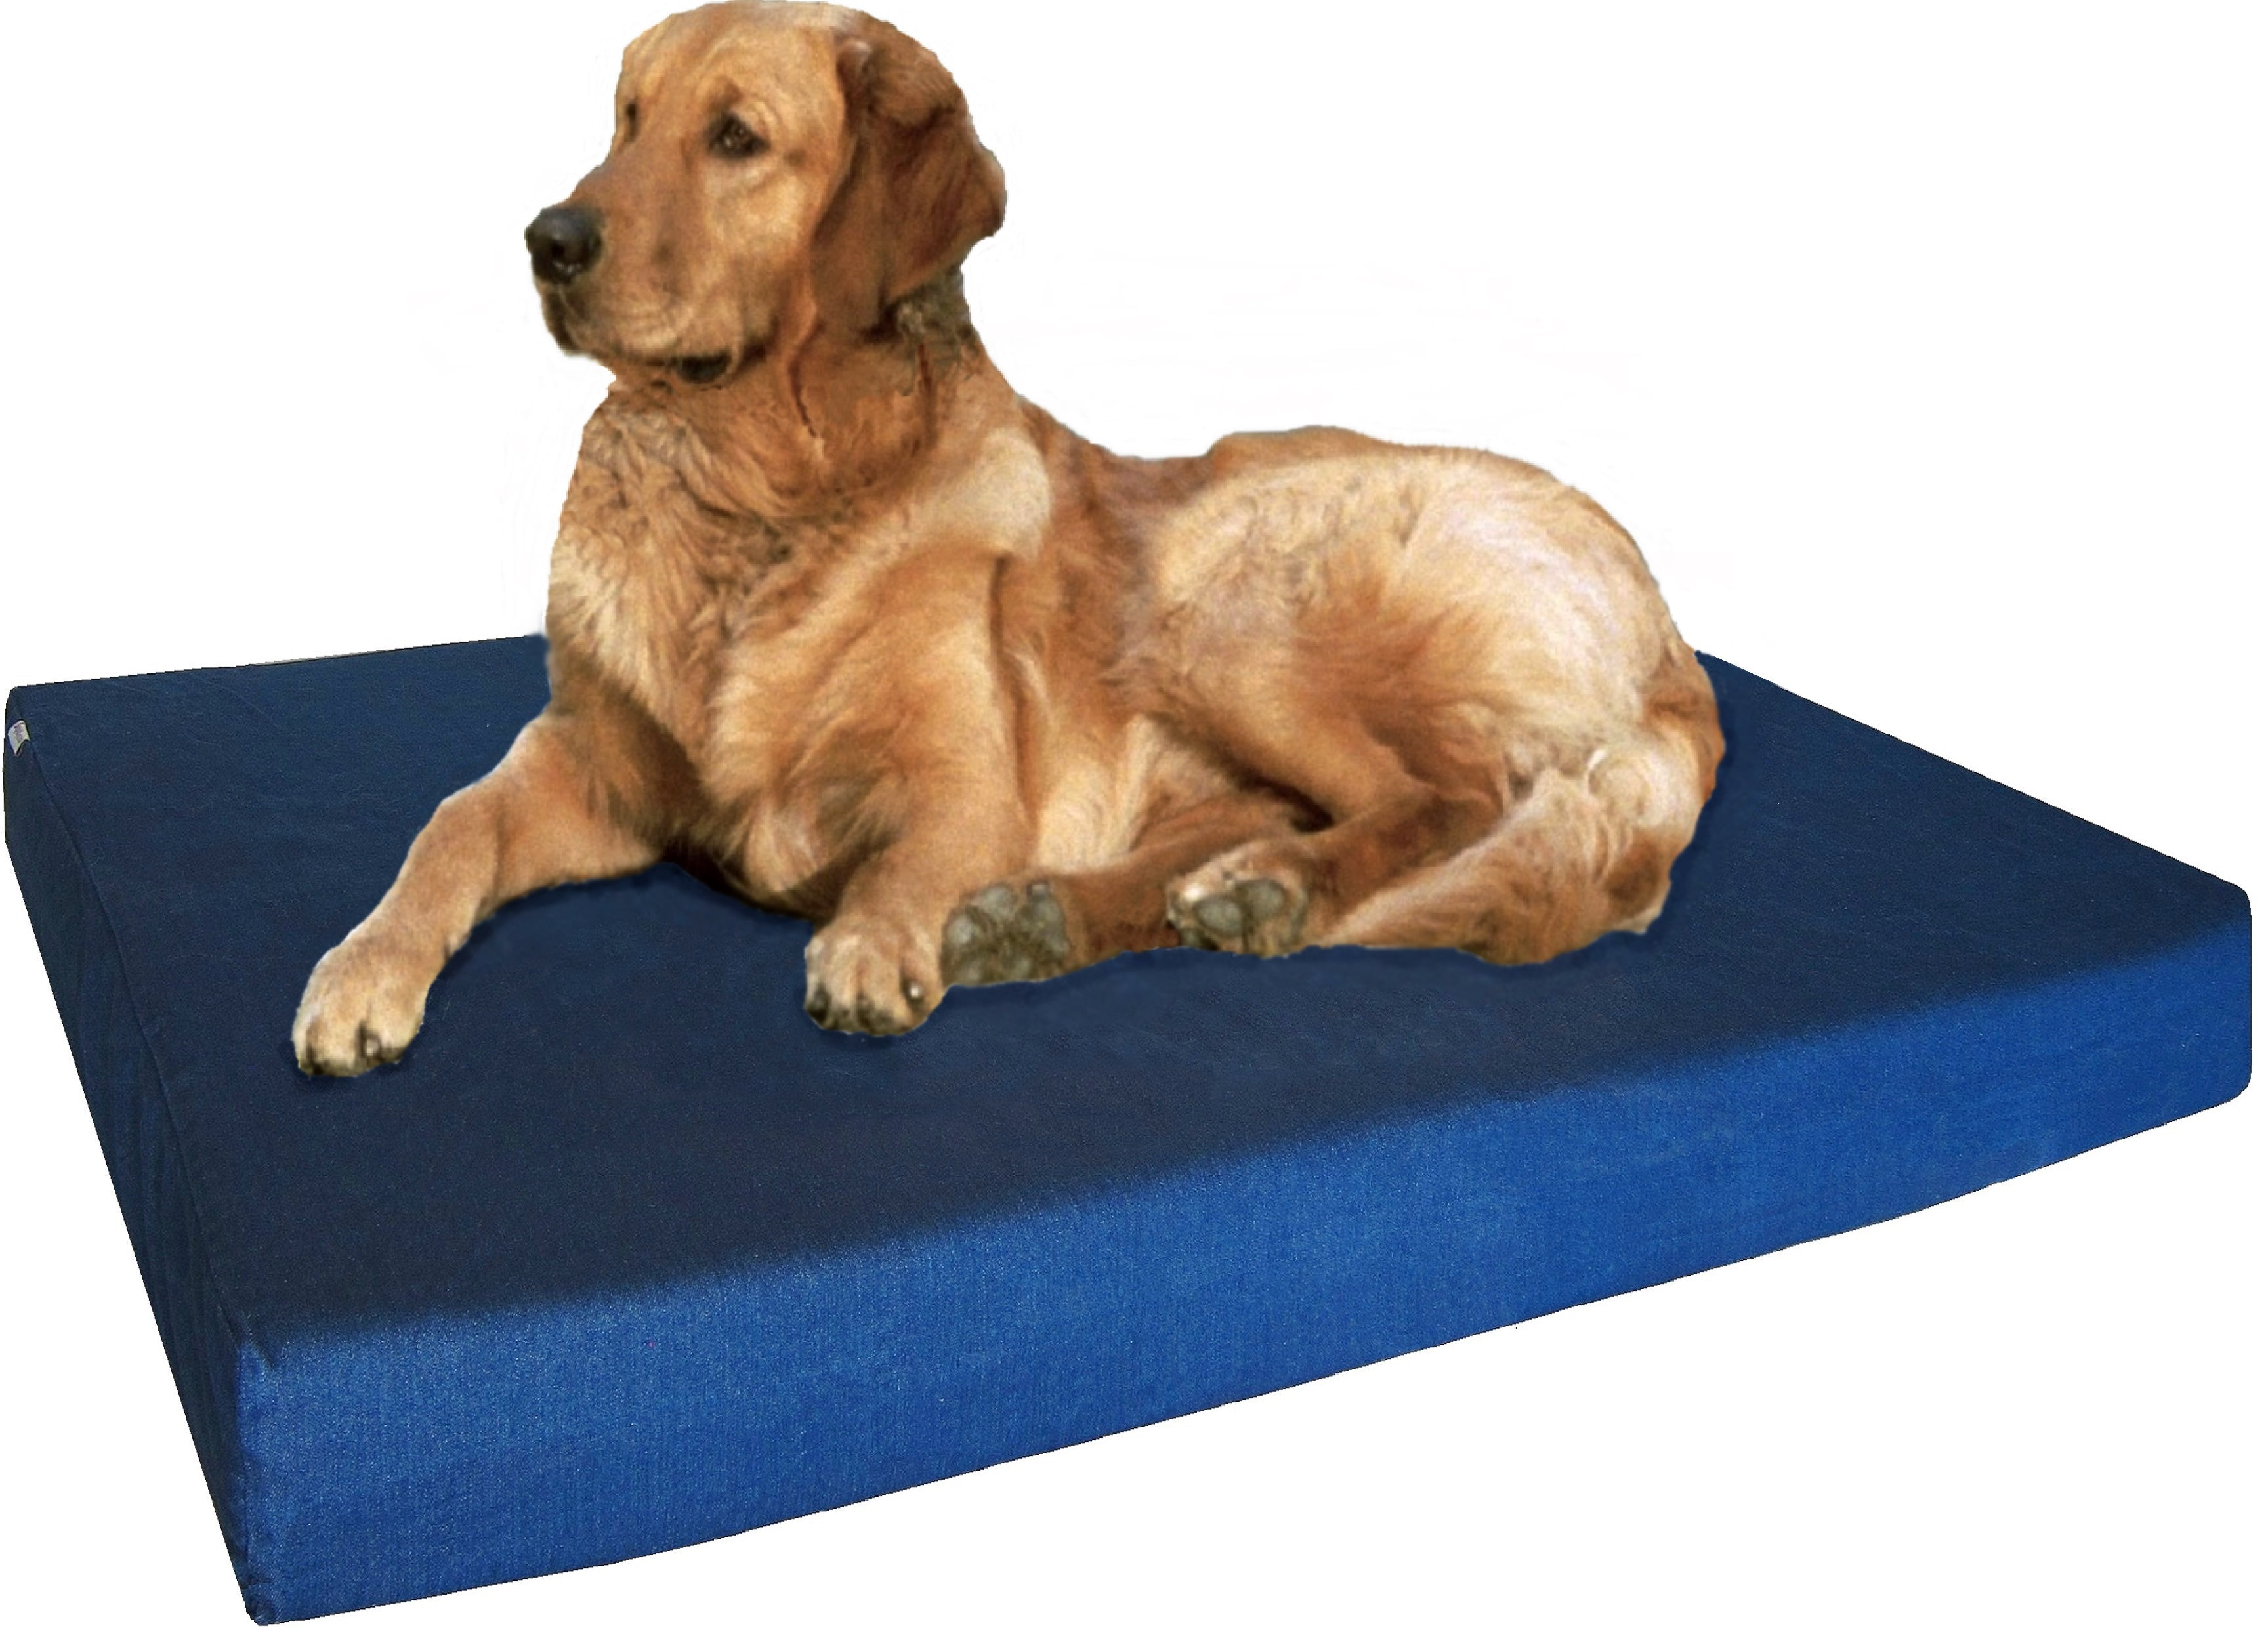 Dogbed4less DIY Durable Blue Denim Pet Bed External Duvet Cover and Waterproof Internal Case for Small Replacement Covers only Medium to Extra Large Dog Bed 